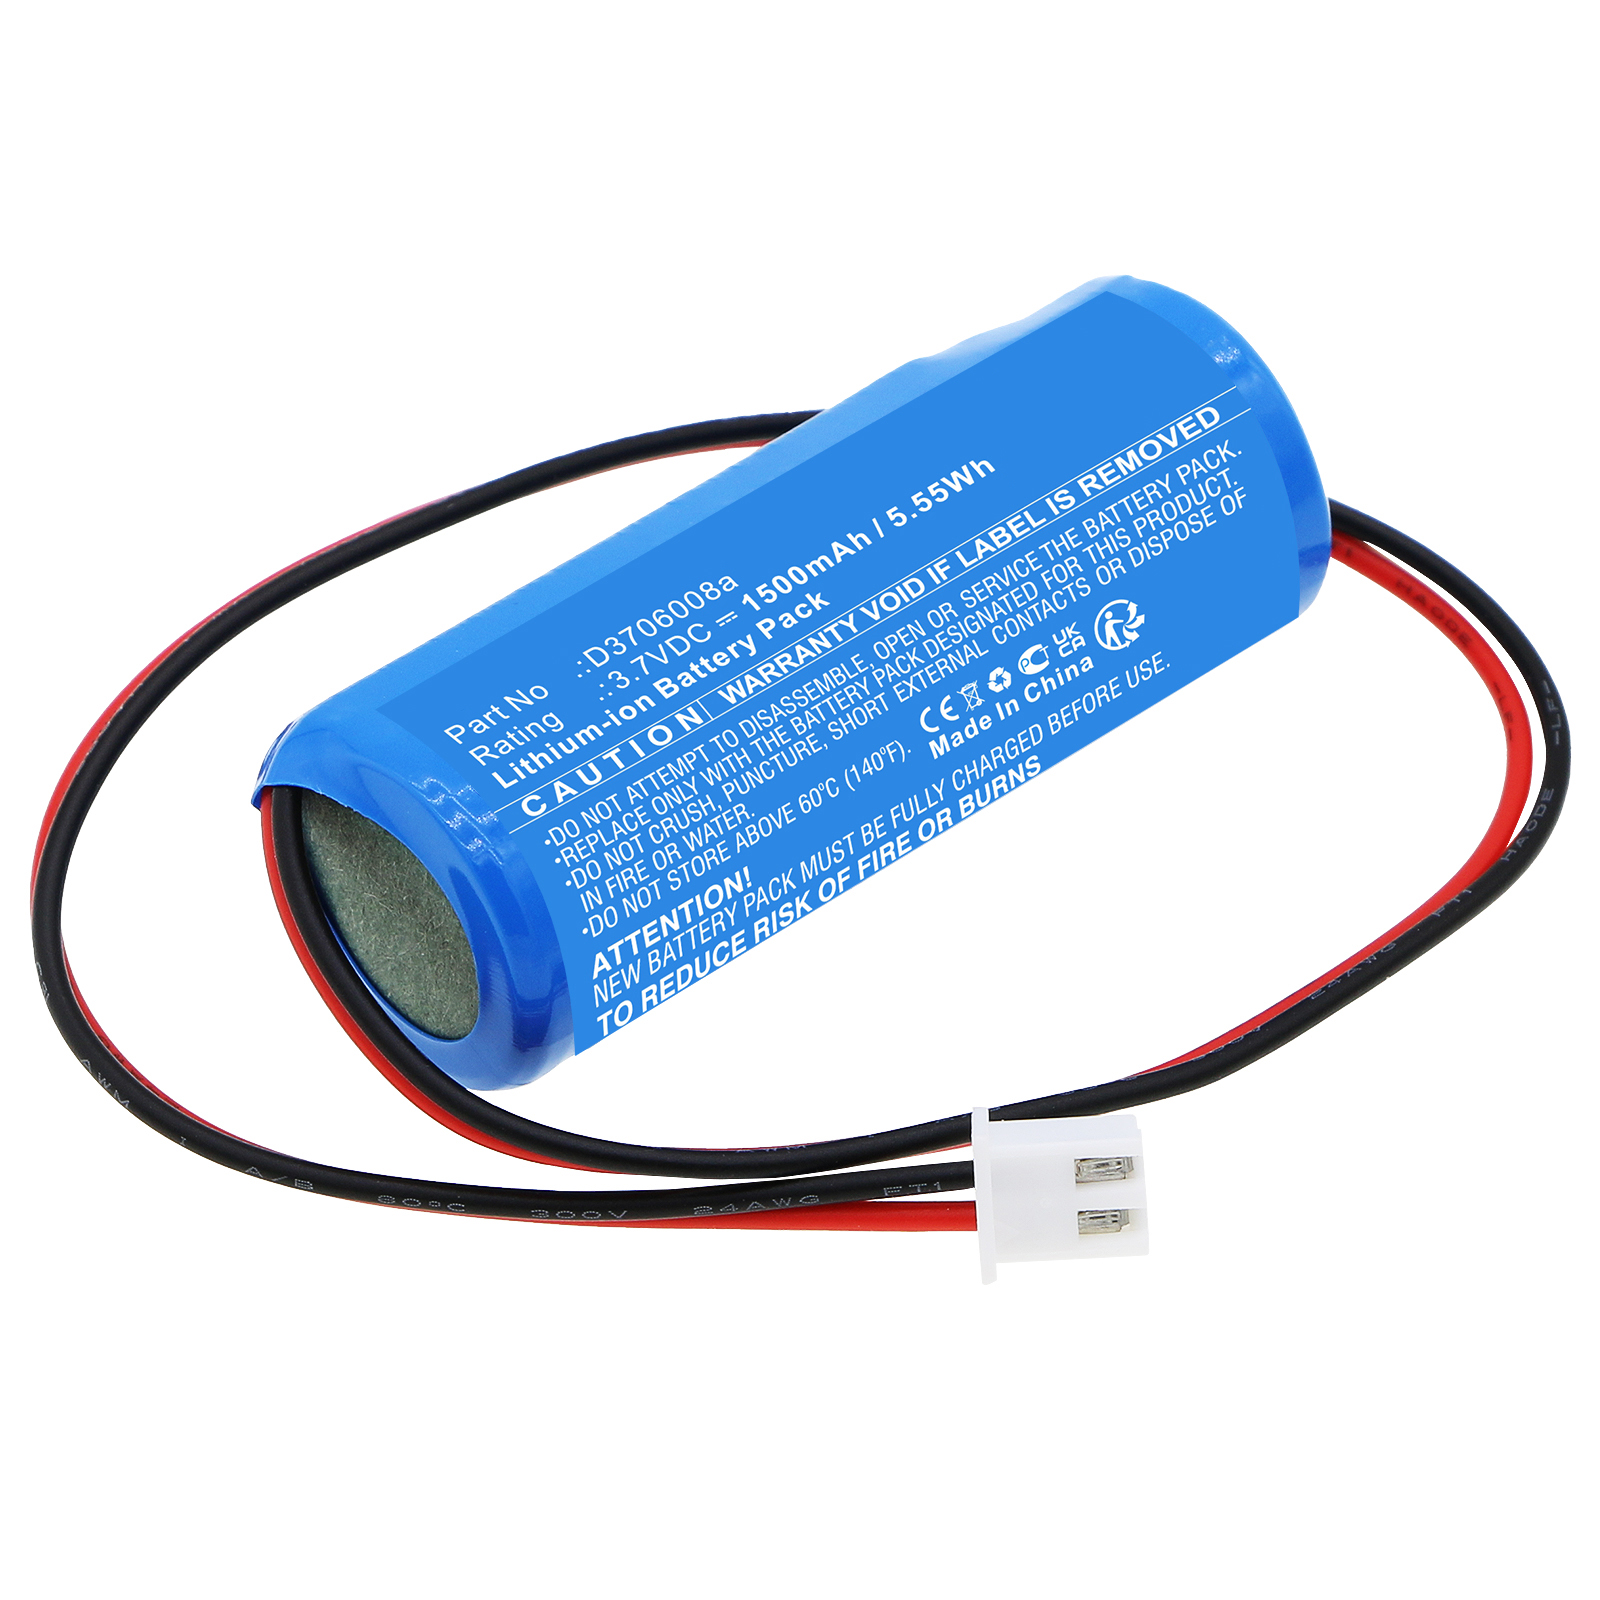 Synergy Digital Medical Battery, Compatible with Revitive D3706008a Medical Battery (Li-ion, 3.7V, 1500mAh)